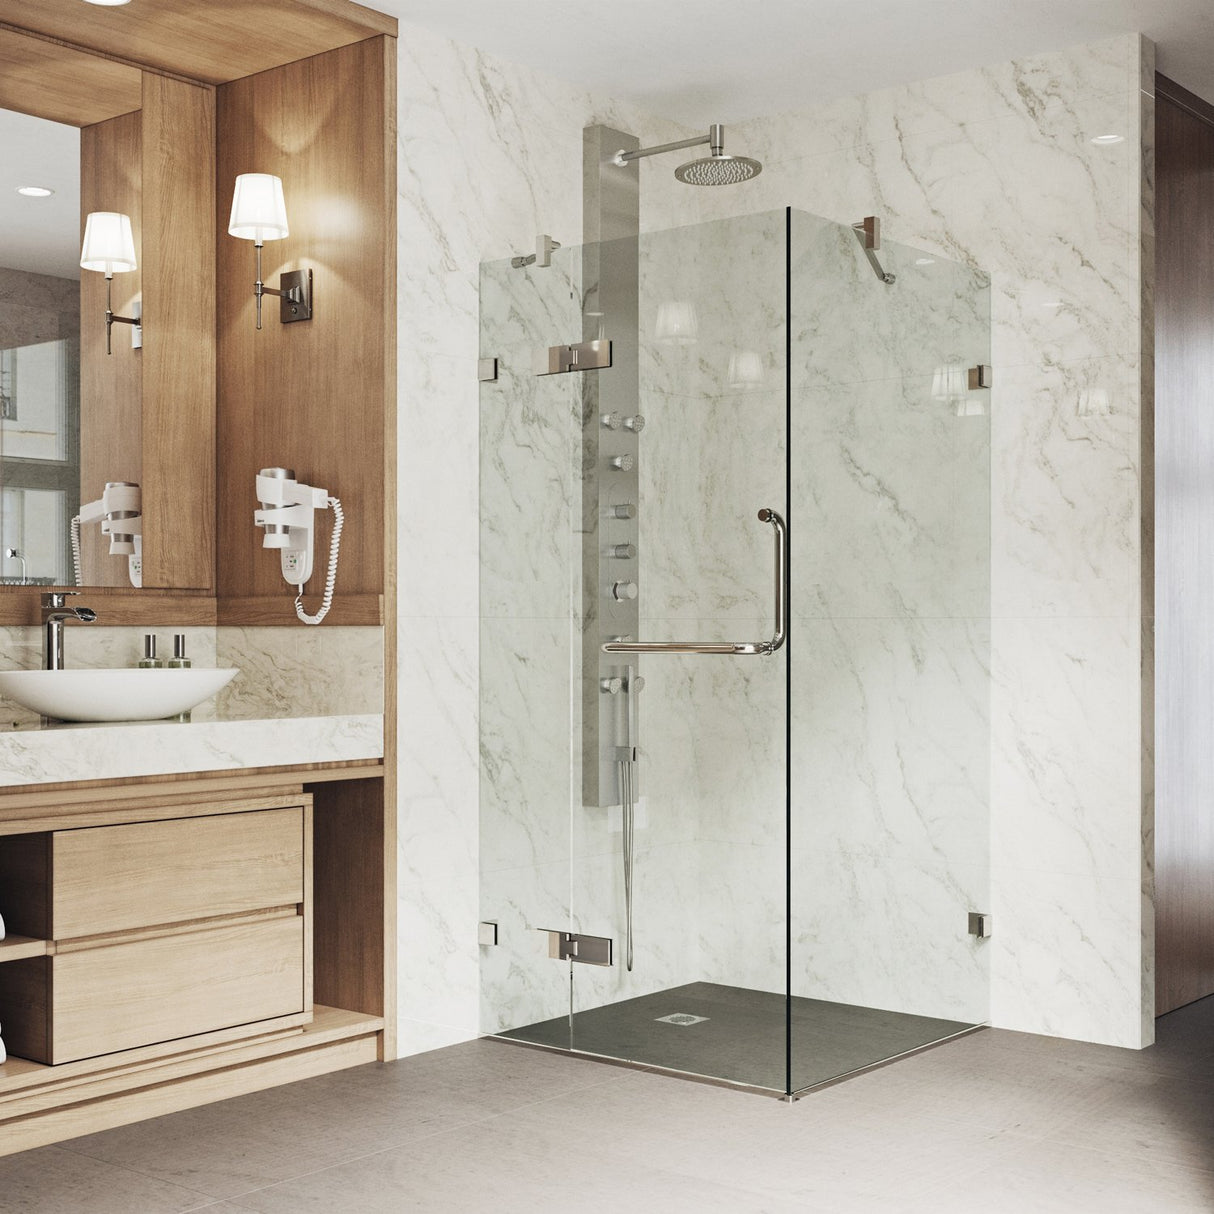 VIGO 30 in. x 30 in. x 73 in. Monteray Frameless Hinged Square Shower Enclosure with Clear 0.38" Tempered Glass and Hardware in Brushed Nickel Finish with Reversible Handle - VG6011BNCL32